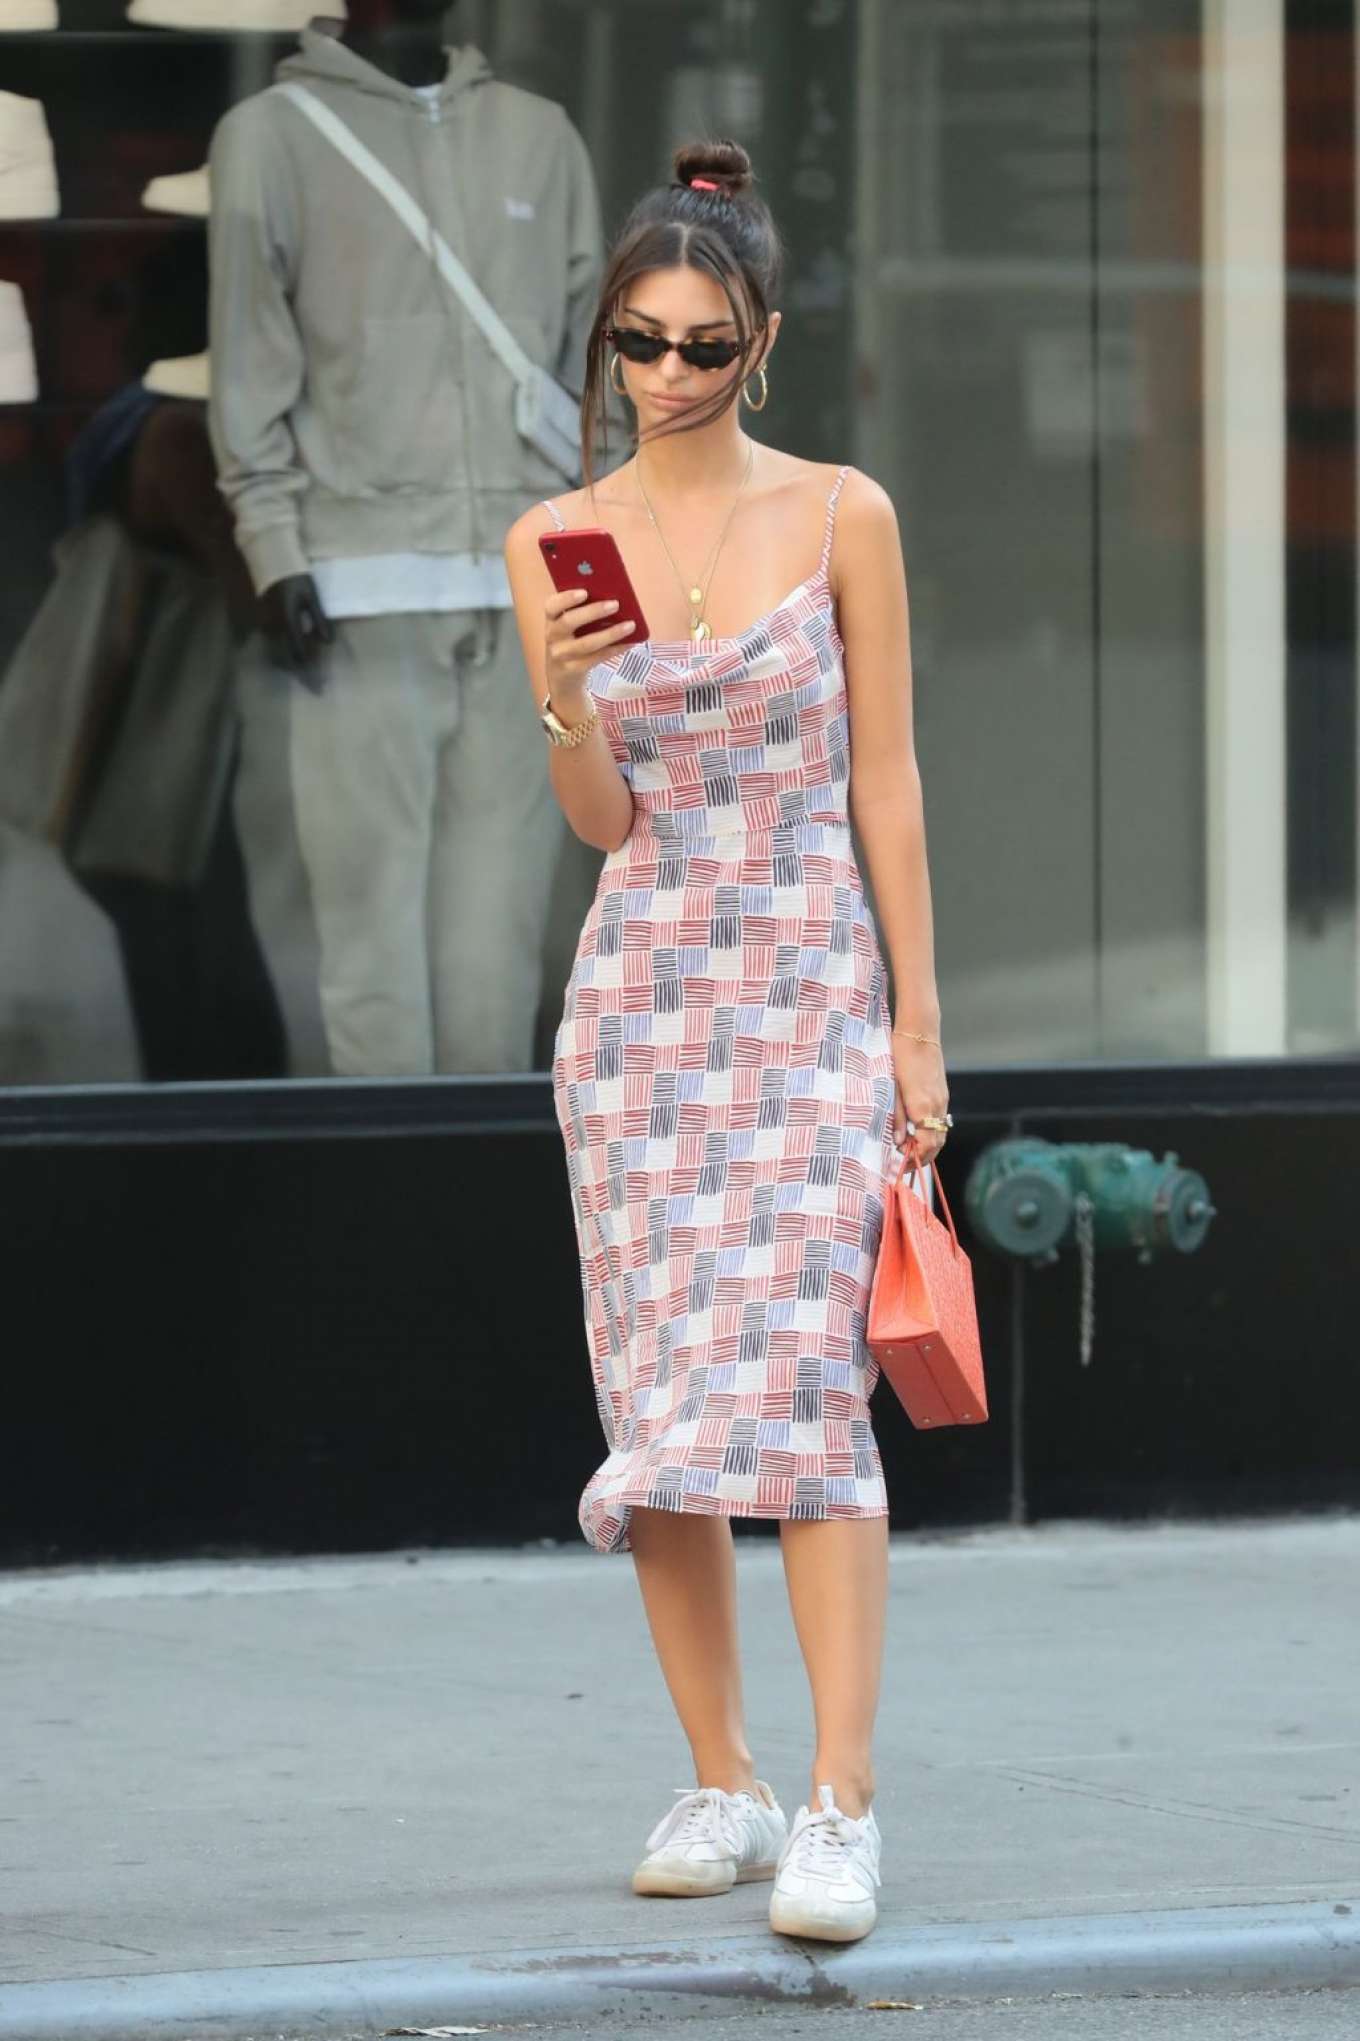 Emily Ratajkowski In Summer Dress â€“ Out With Friends In New York City